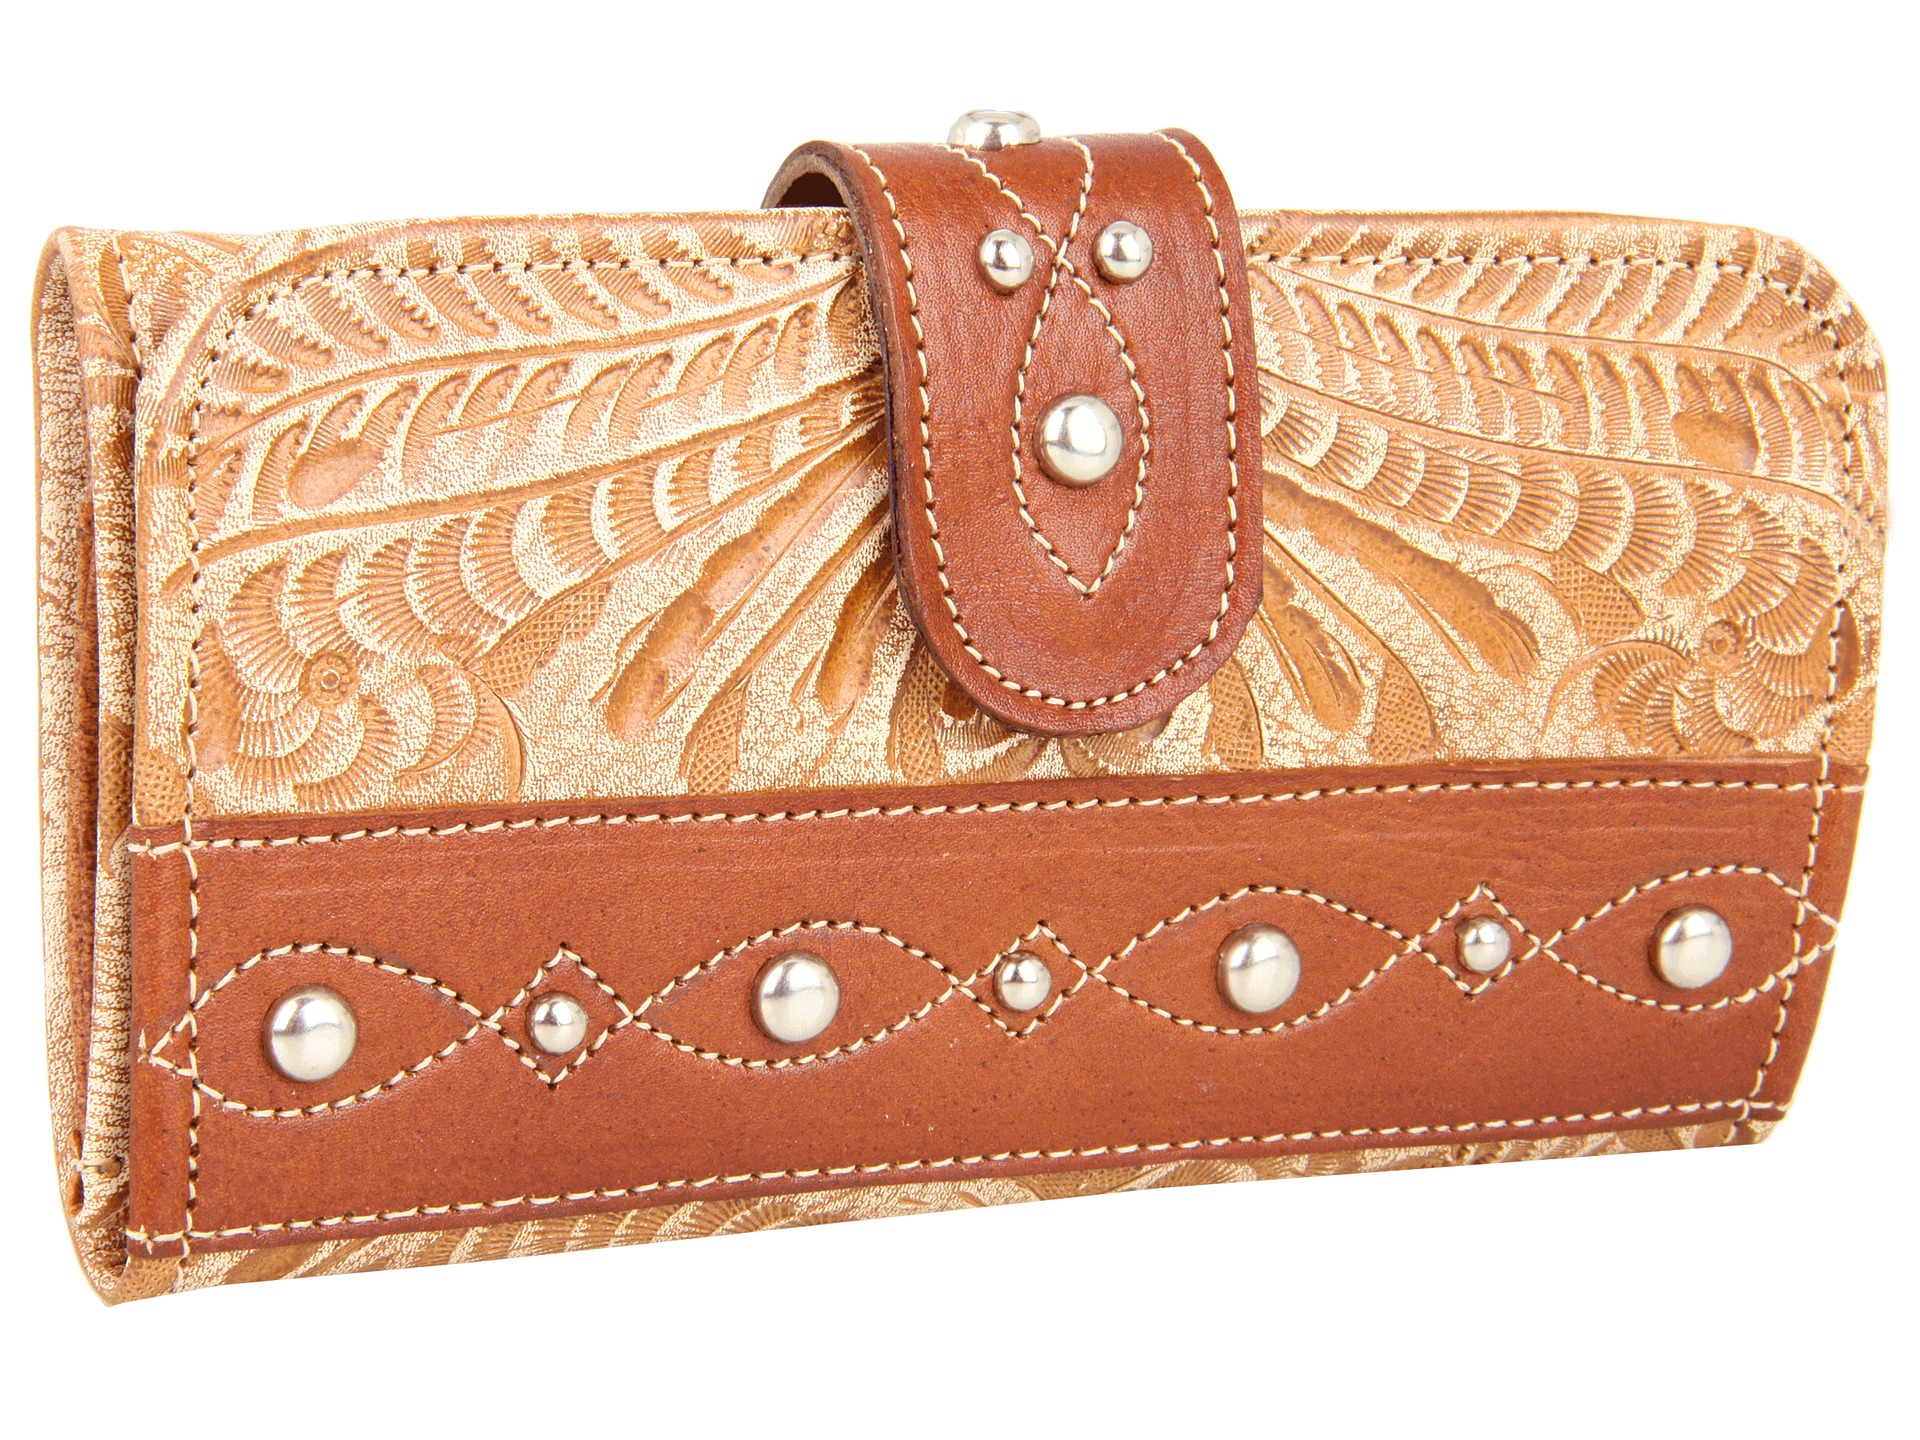 American West Over The Rainbow Tri fold Wallet $80.99 $89.00 Rated 5 